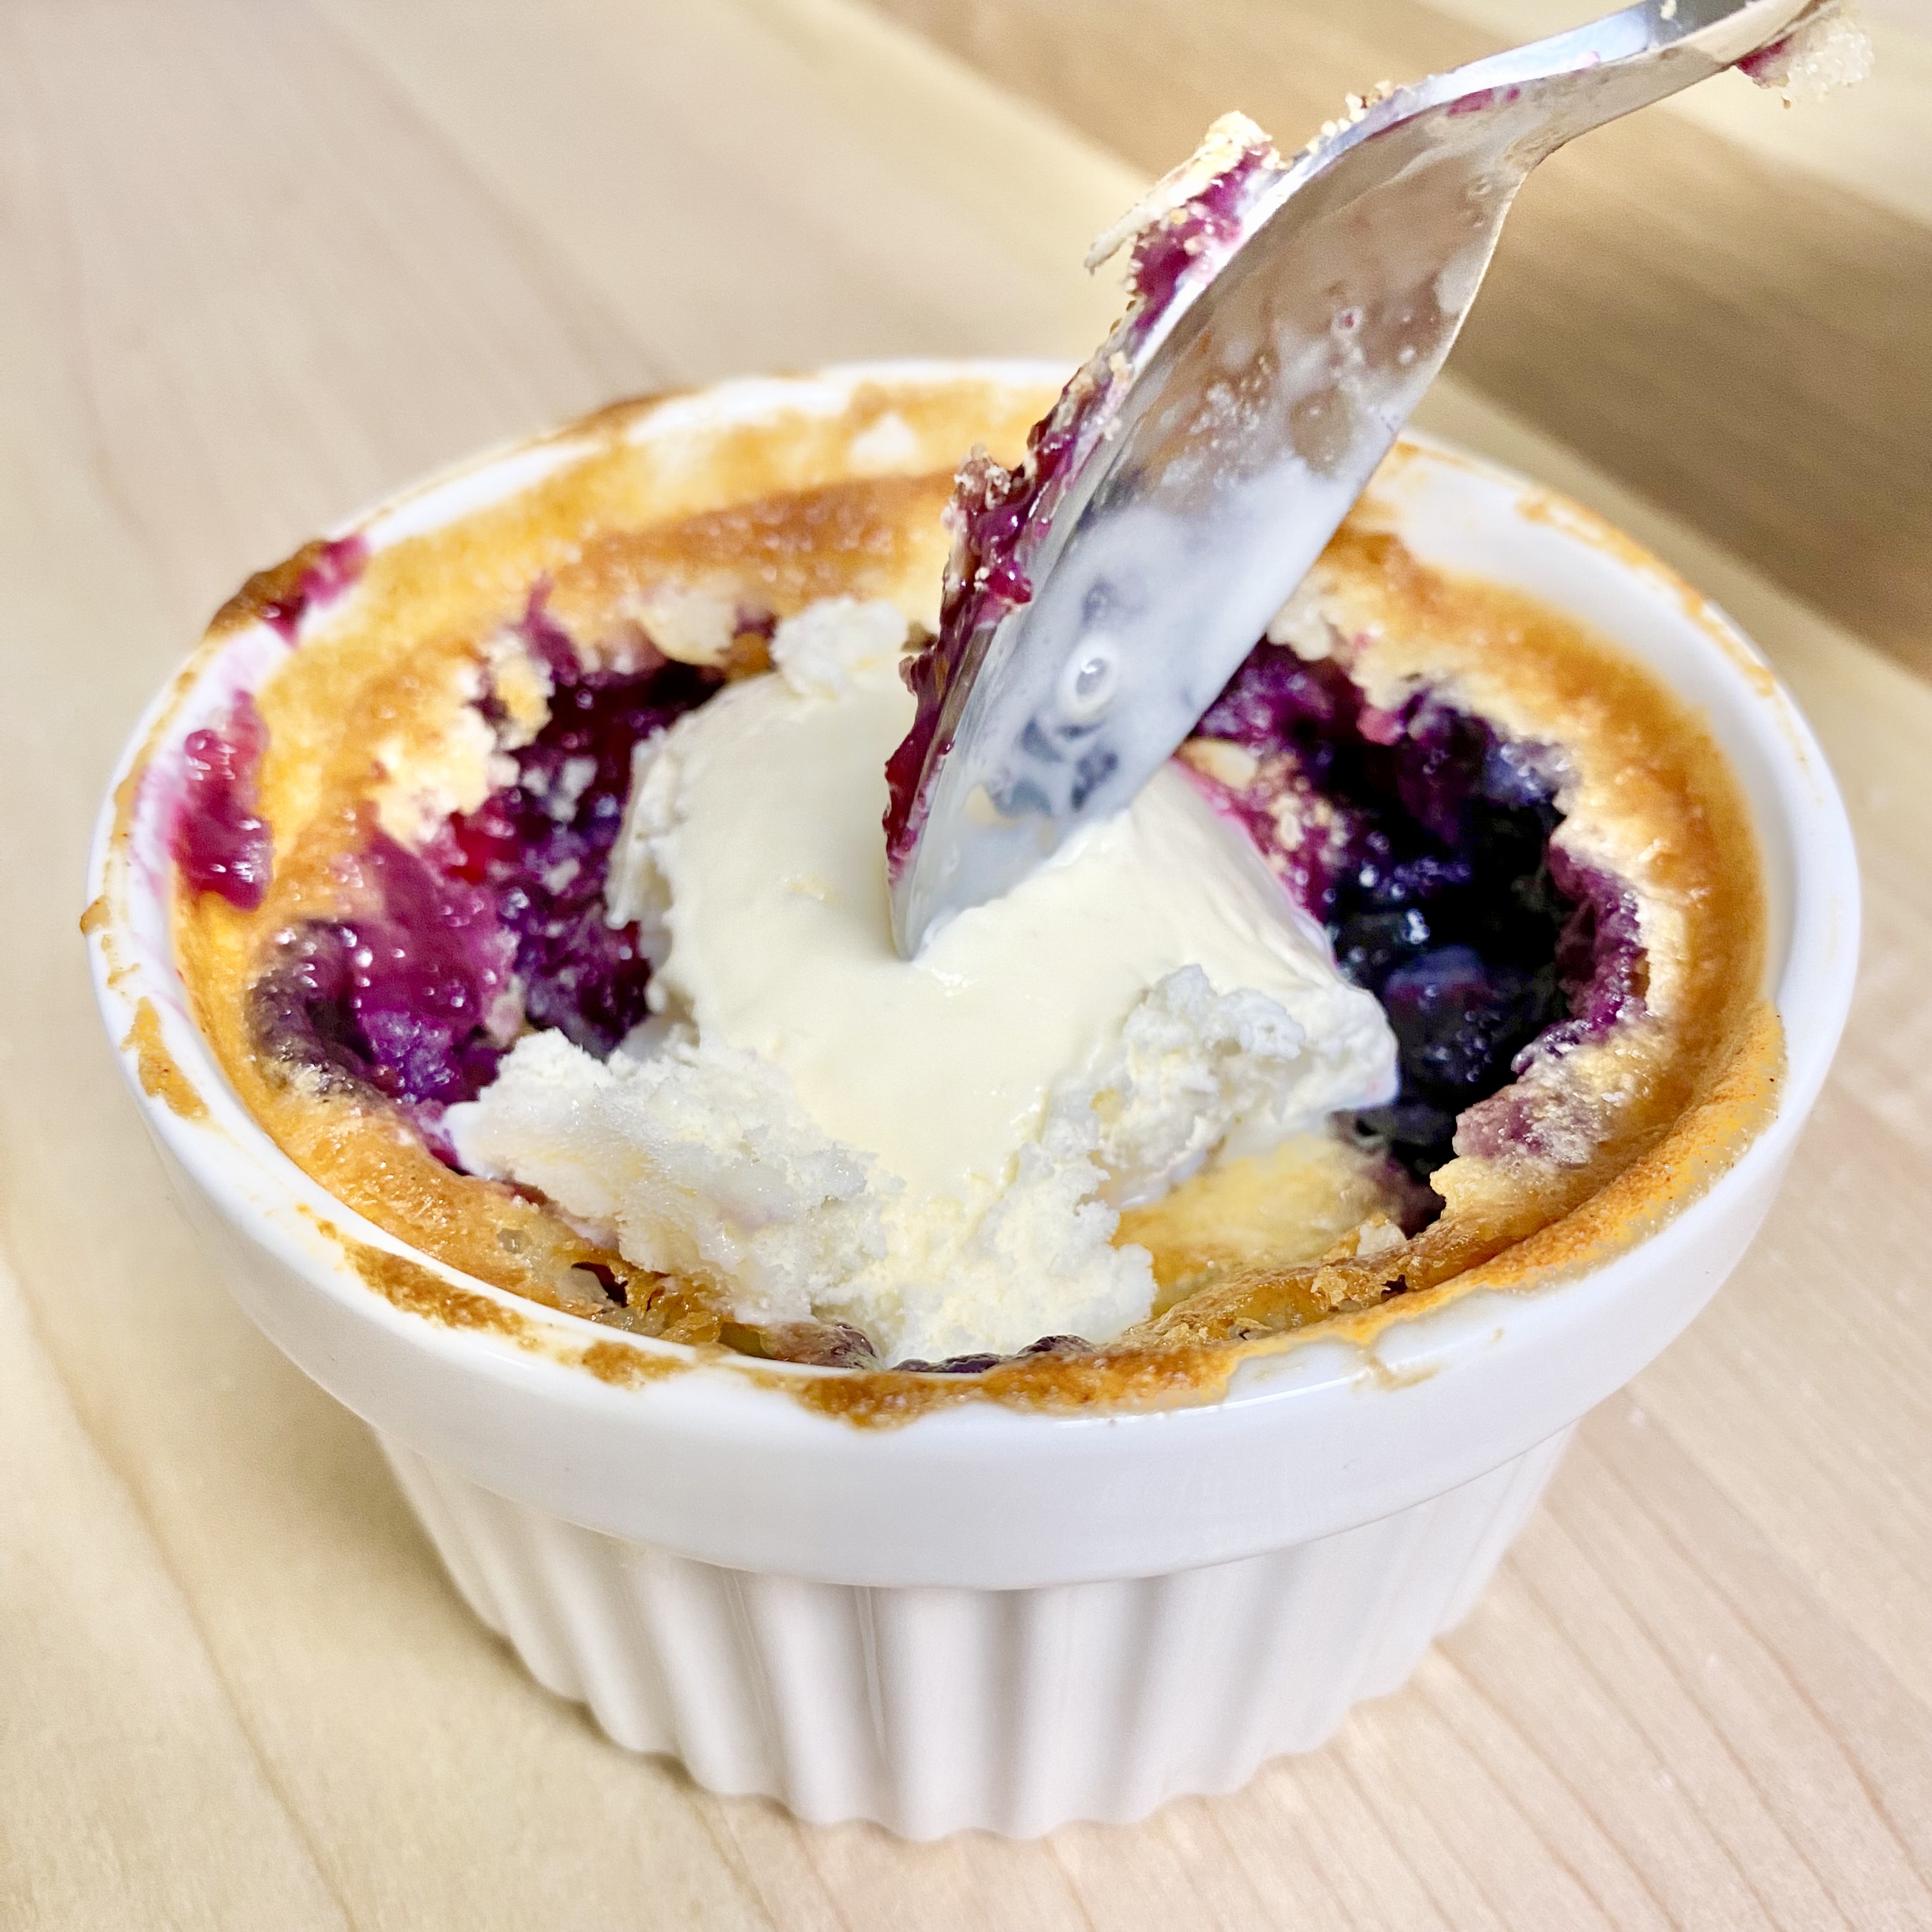 Blueberry cobbler in a ramekin, topped with ice cream